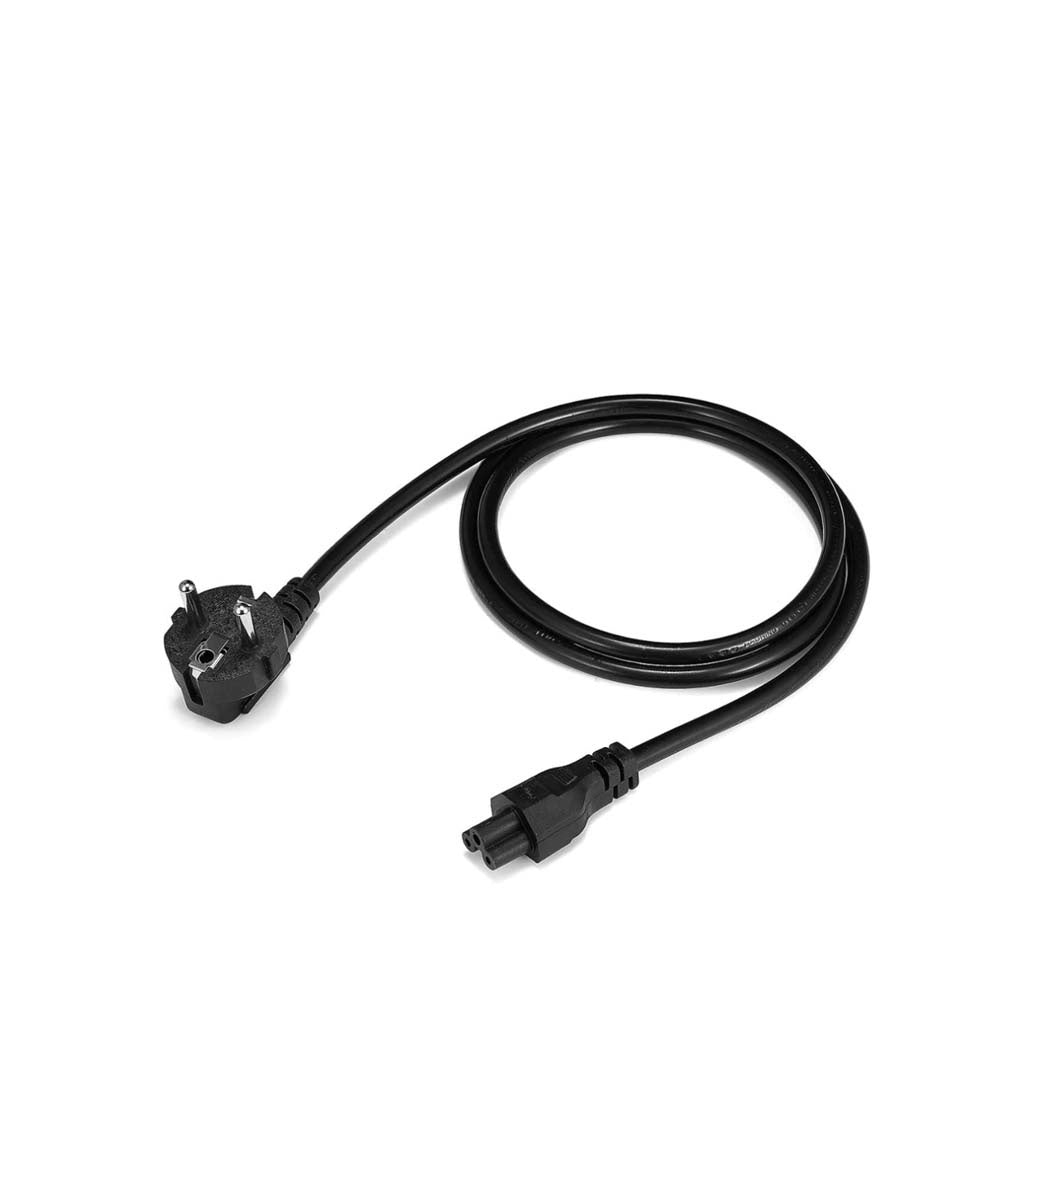  XHSESA Black Connection Cable Wire Line Power Replacement for  Ninebot No. 9 MAX G30/G30D Electric Scooter Parts : Sports & Outdoors